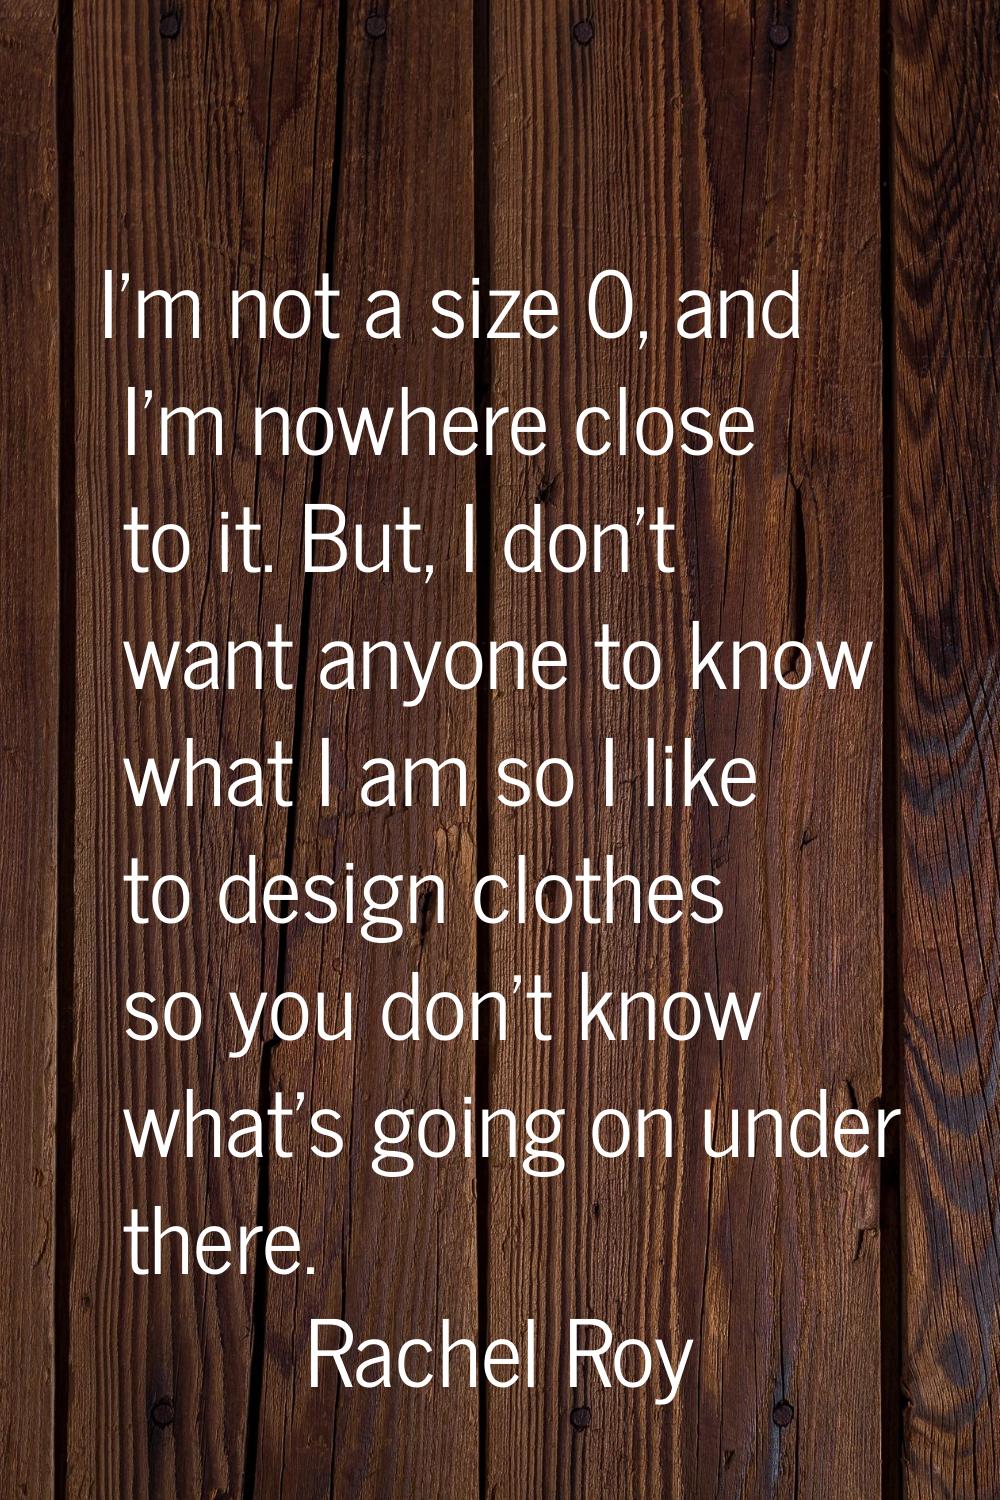 I'm not a size 0, and I'm nowhere close to it. But, I don't want anyone to know what I am so I like